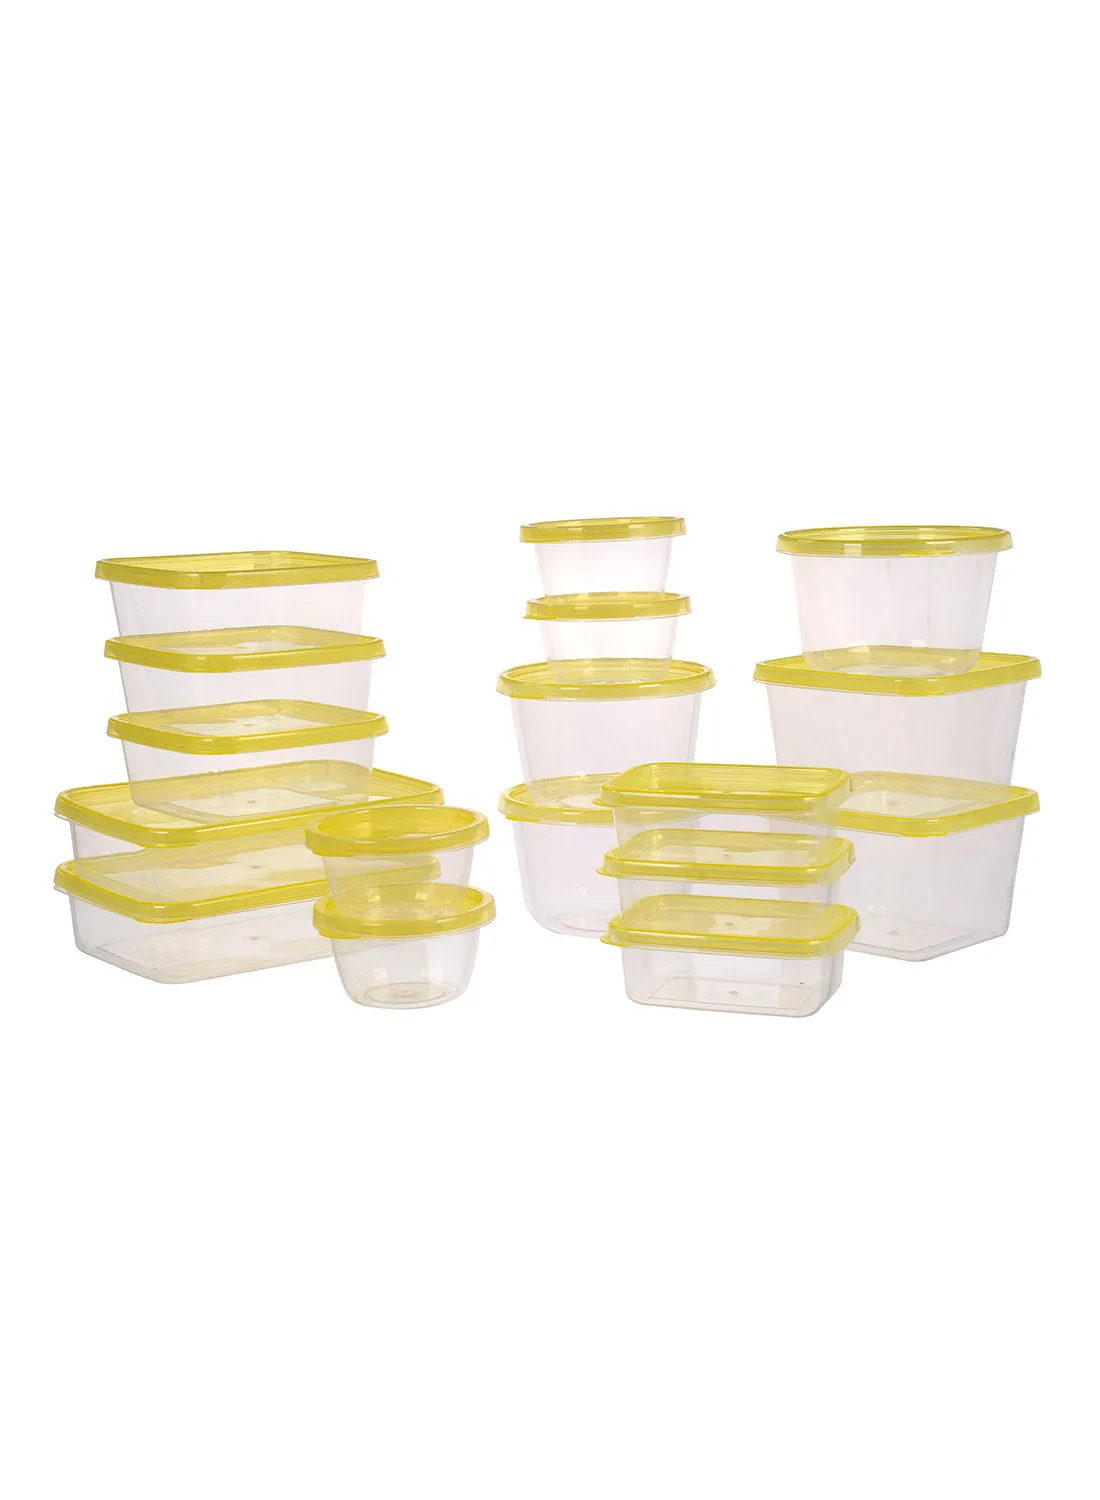 Amal 14 Piece Plastic Food Container Set - Spill Proof Lids - Food Storage Box - Storage Boxes - Kitchen Cabinet Organizers - Yellow